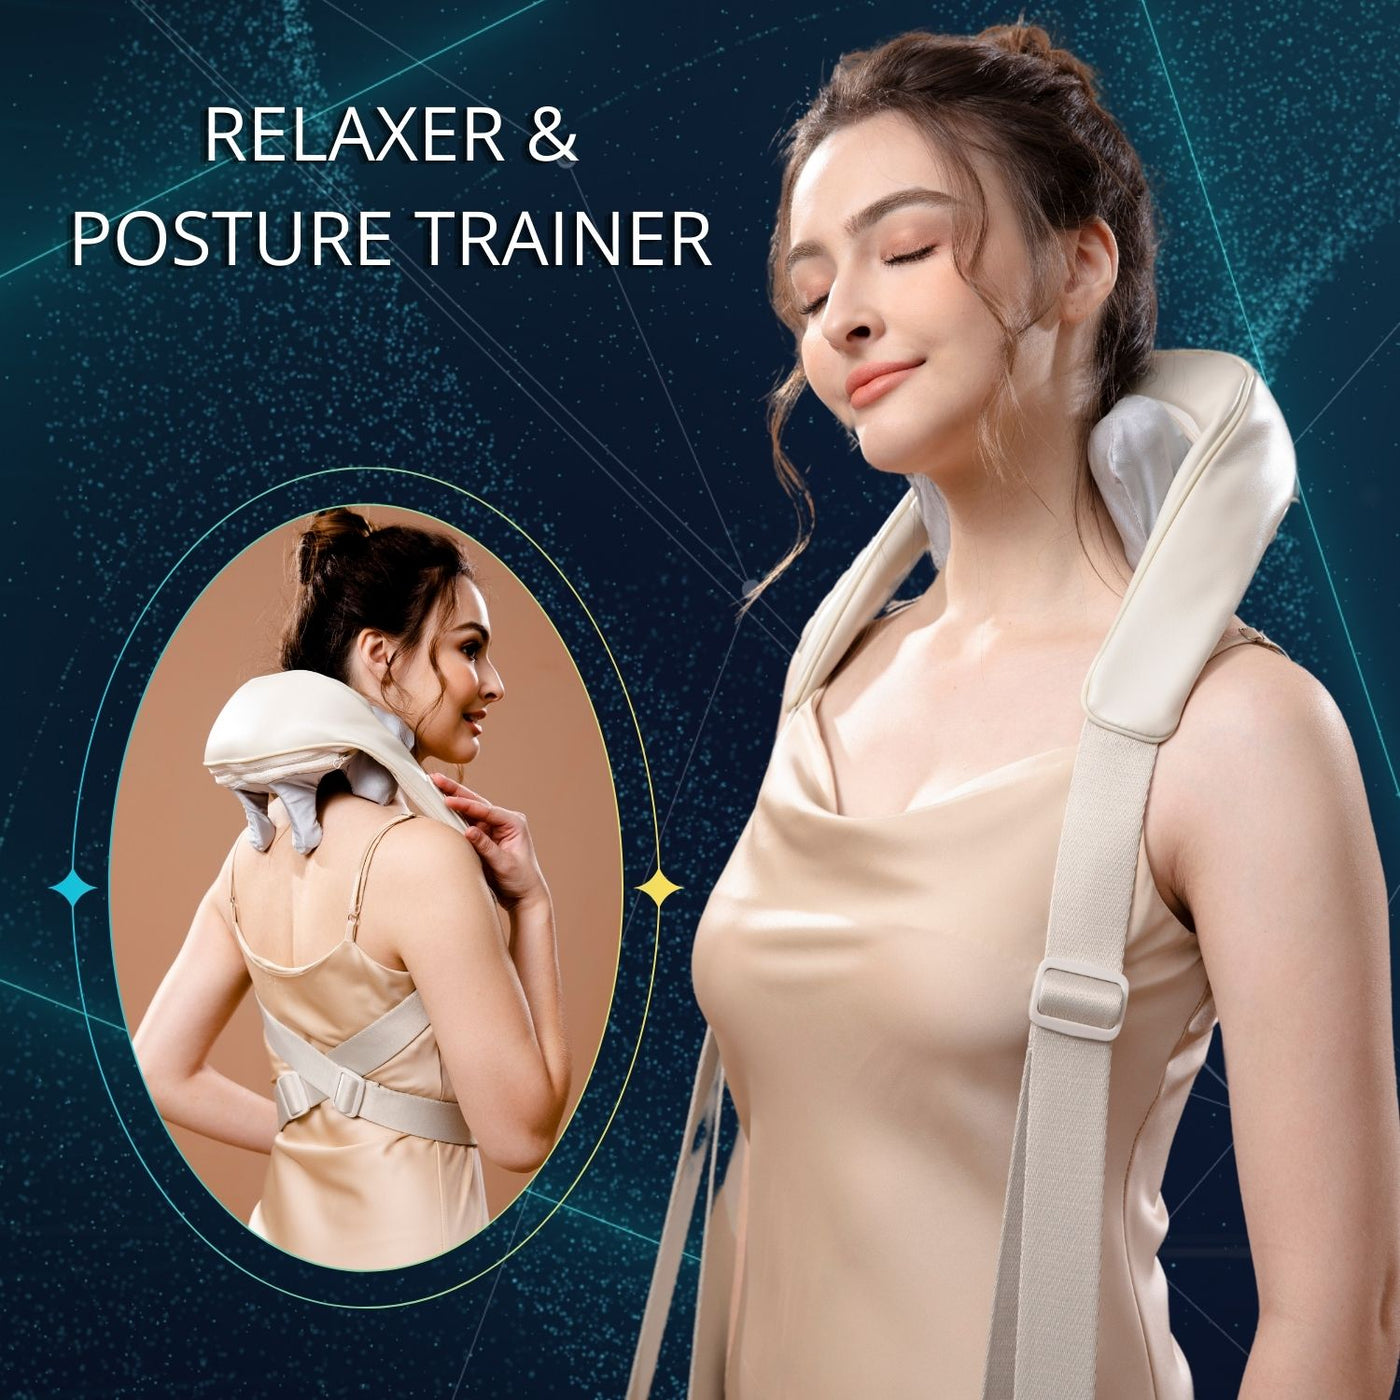 Asinhe Luxe Wearable Neck & Shoulder Massager with Heat - Eco-Friendly Material, Ergonomic Design, Deep Kneading for Pain Relief, Ideal Gift for All (Luxury Edition)